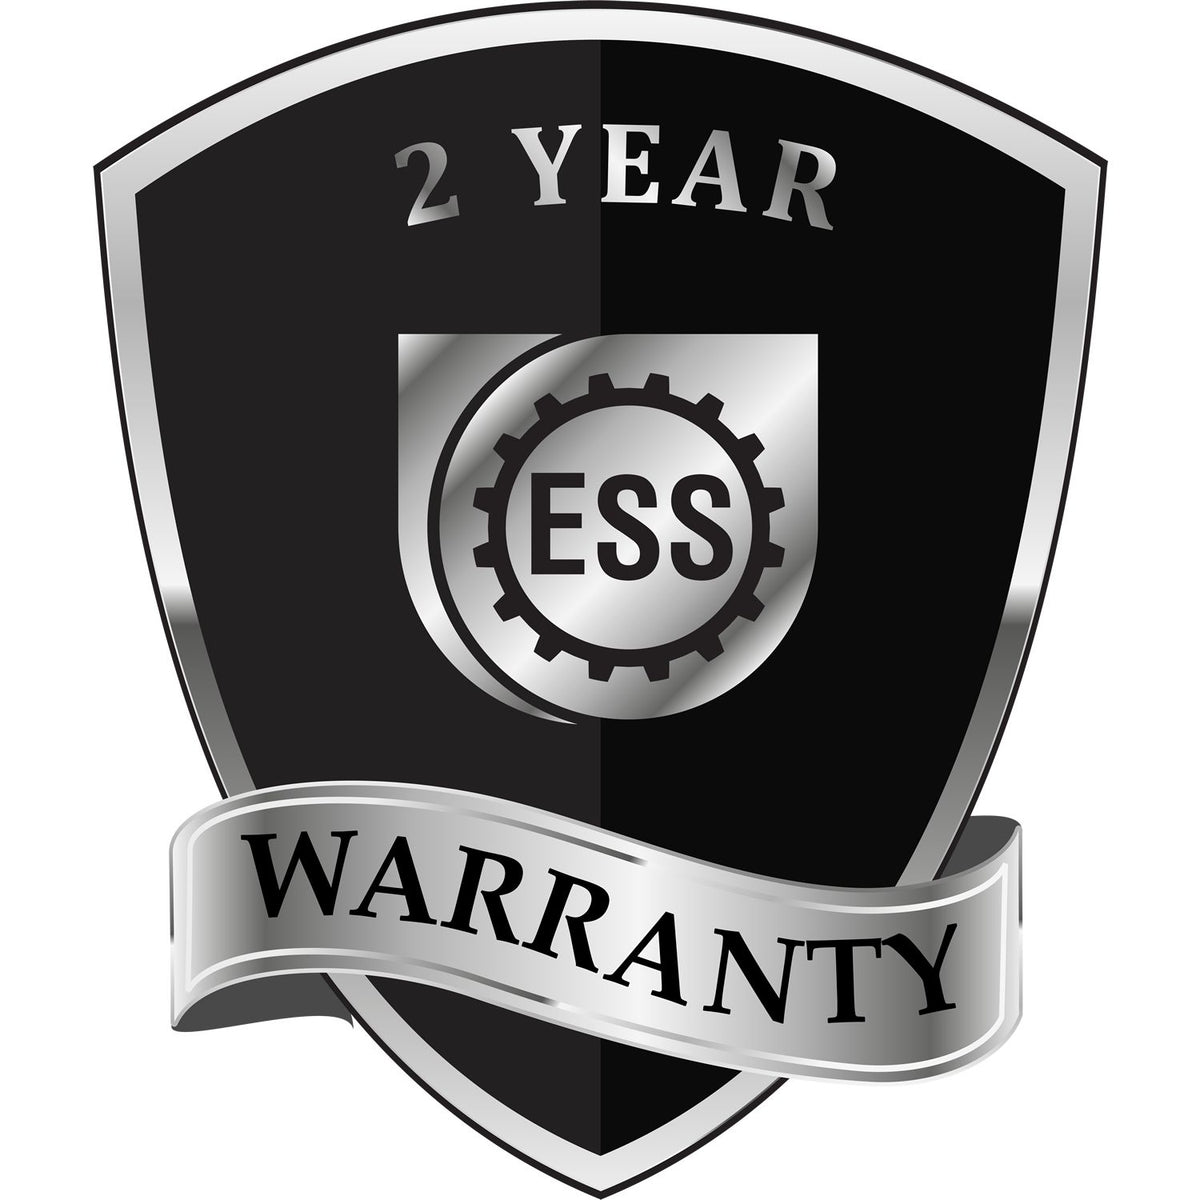 A badge or emblem showing a warranty icon for the Long Reach Maine Land Surveyor Seal